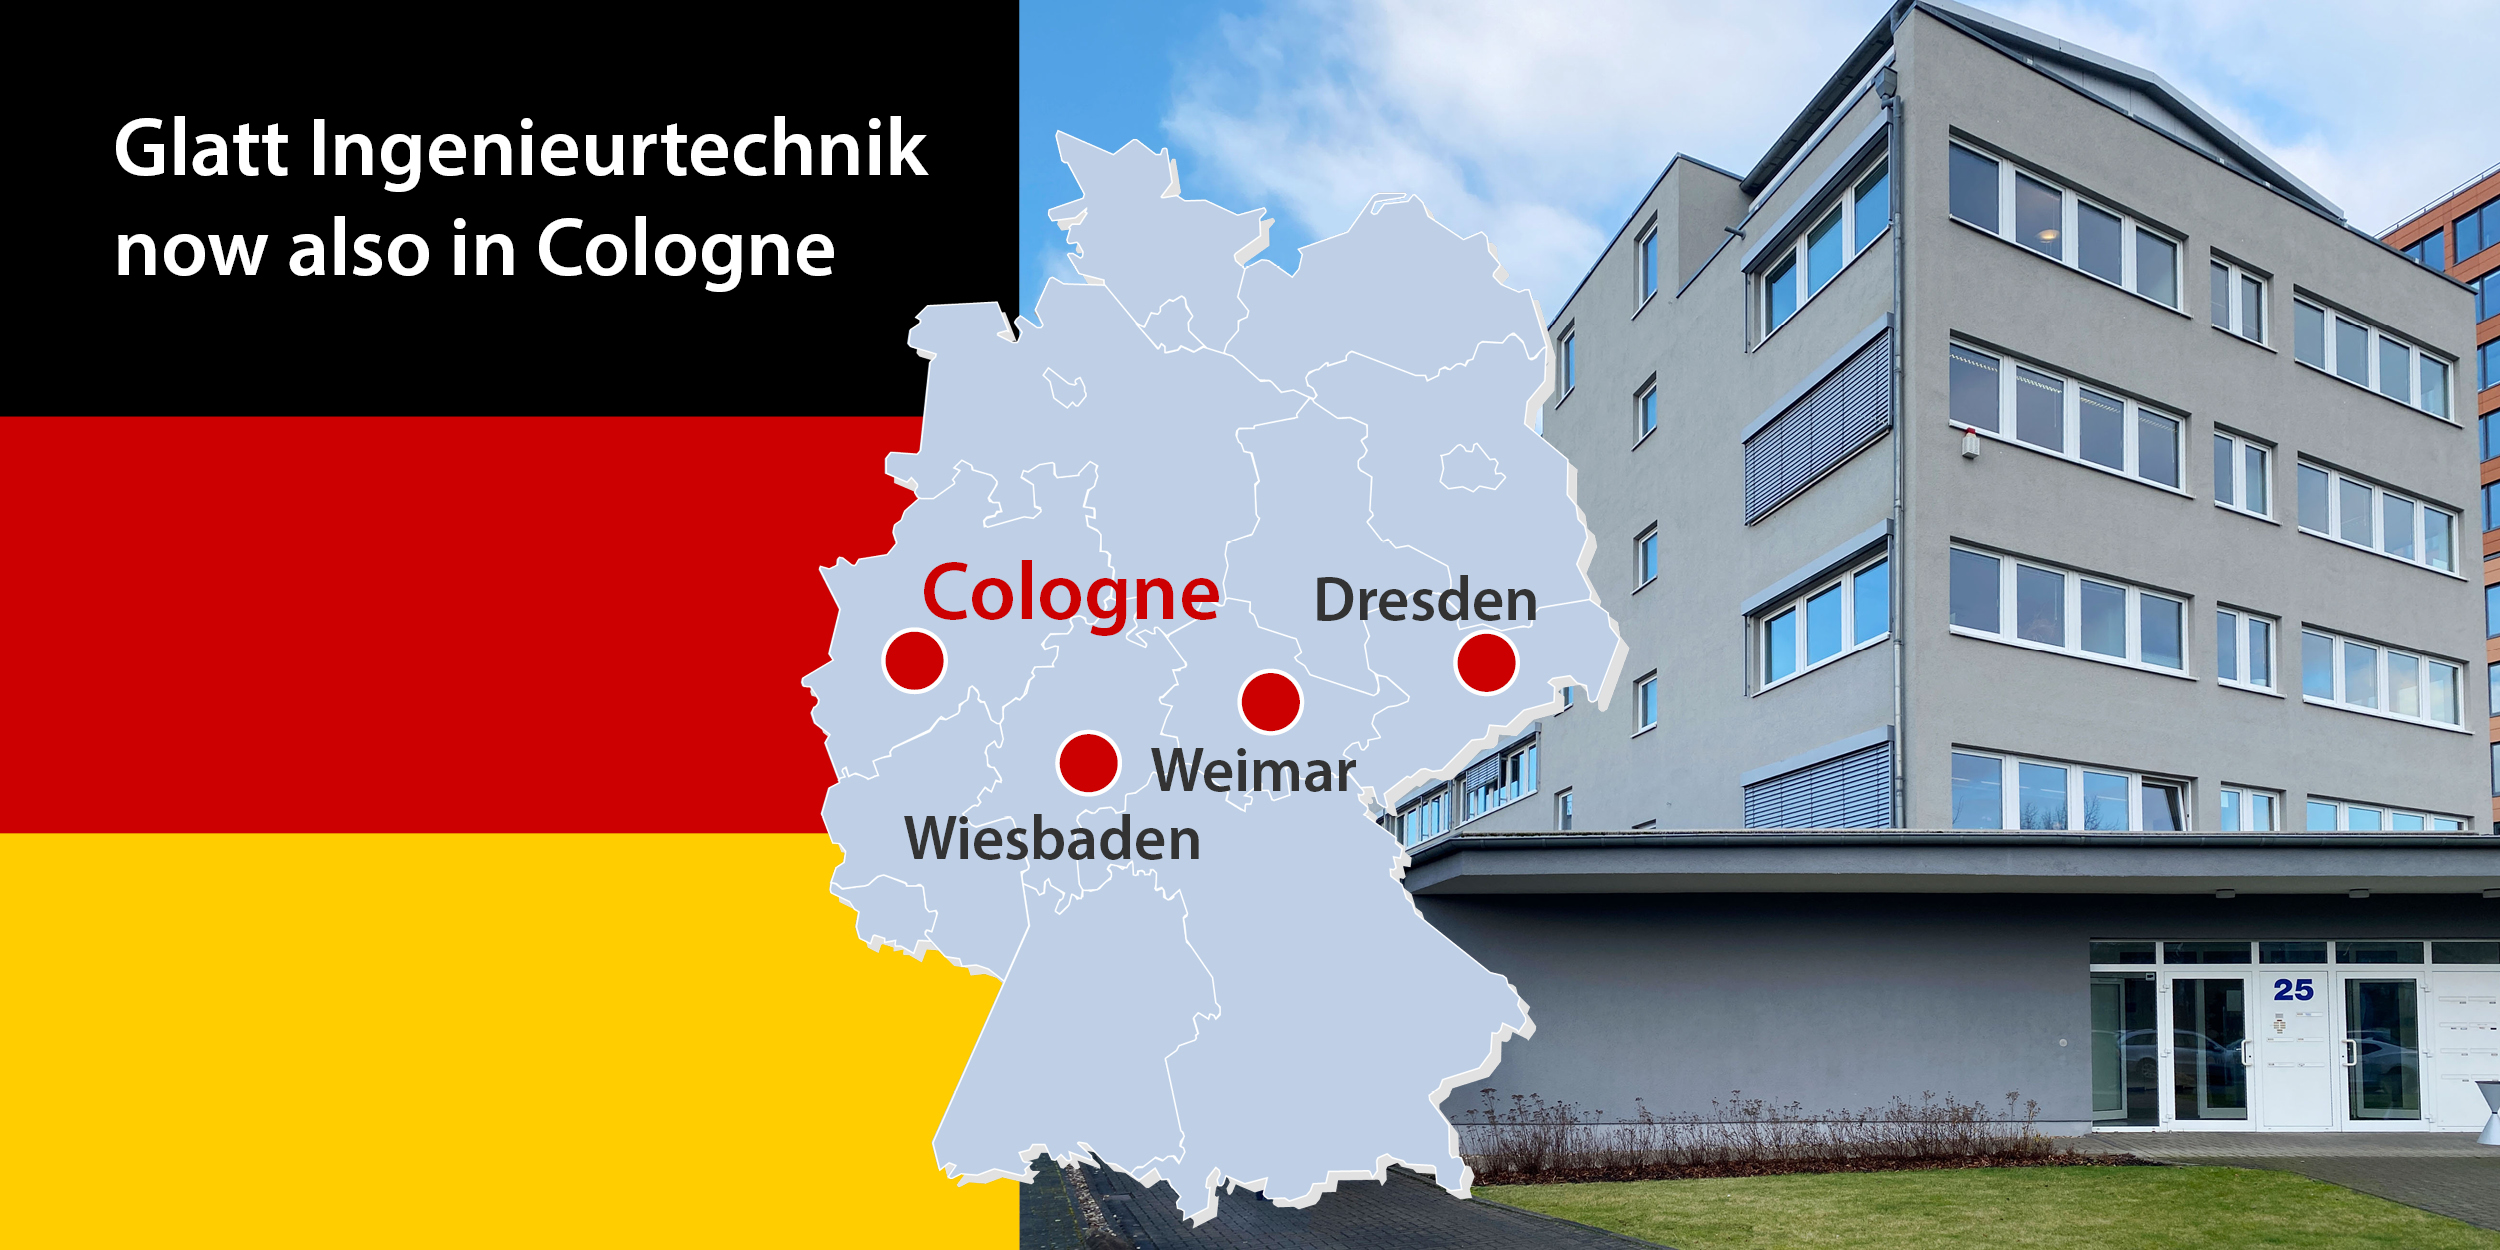 Glatt Ingenieurtechnik, the plant manufacturer, process expert and engineering provider, is opening a branch in Cologne, Germany